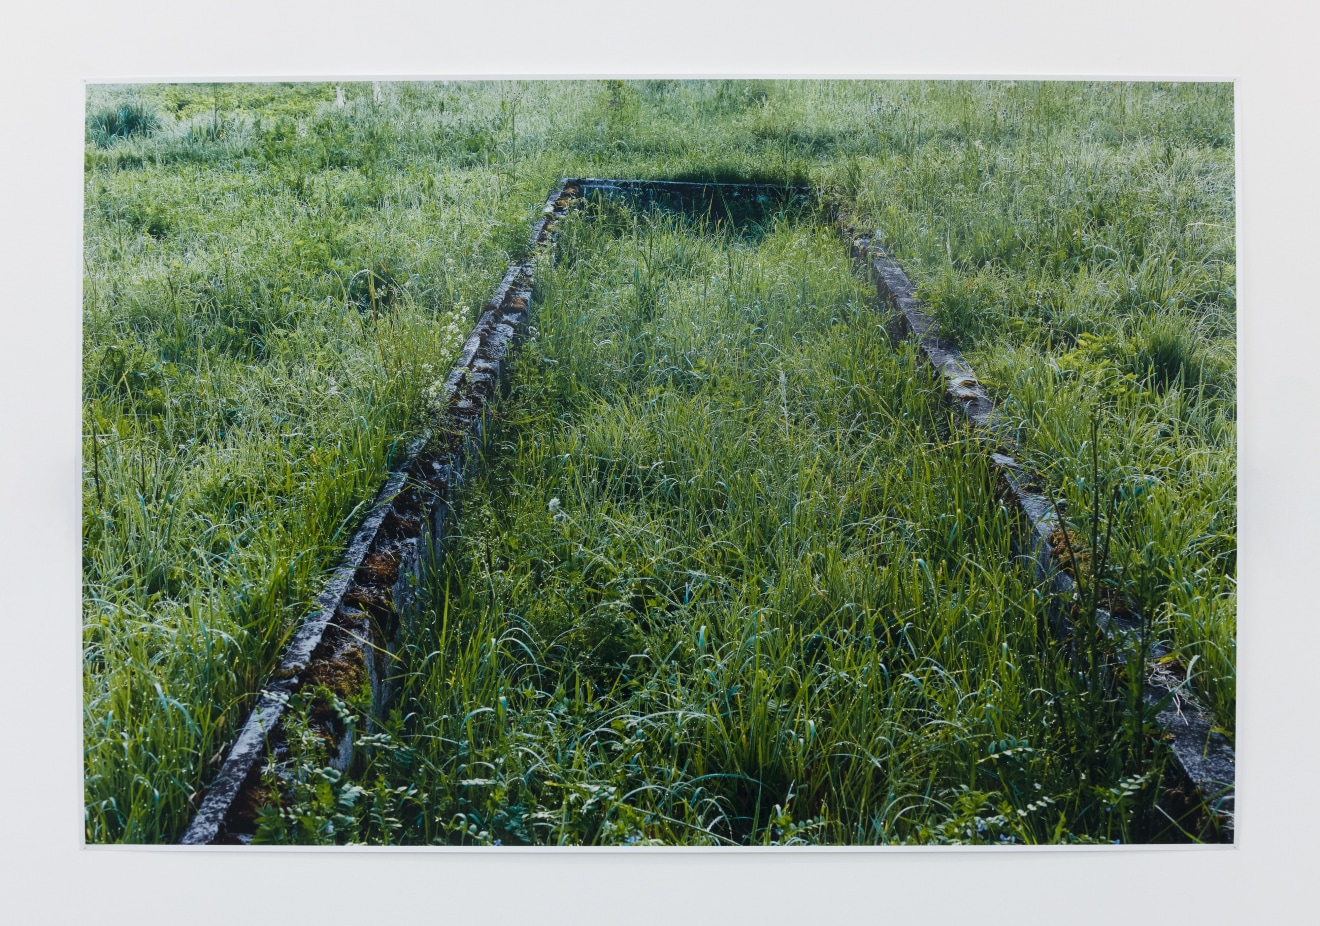 Andrea B&uuml;ttner, Former plant beds from the plantation and &quot;herb gardens,&quot; used by the Nazis for biodynamic agricultural research, at the Dachau Concentration Camp, 2019 - 2020